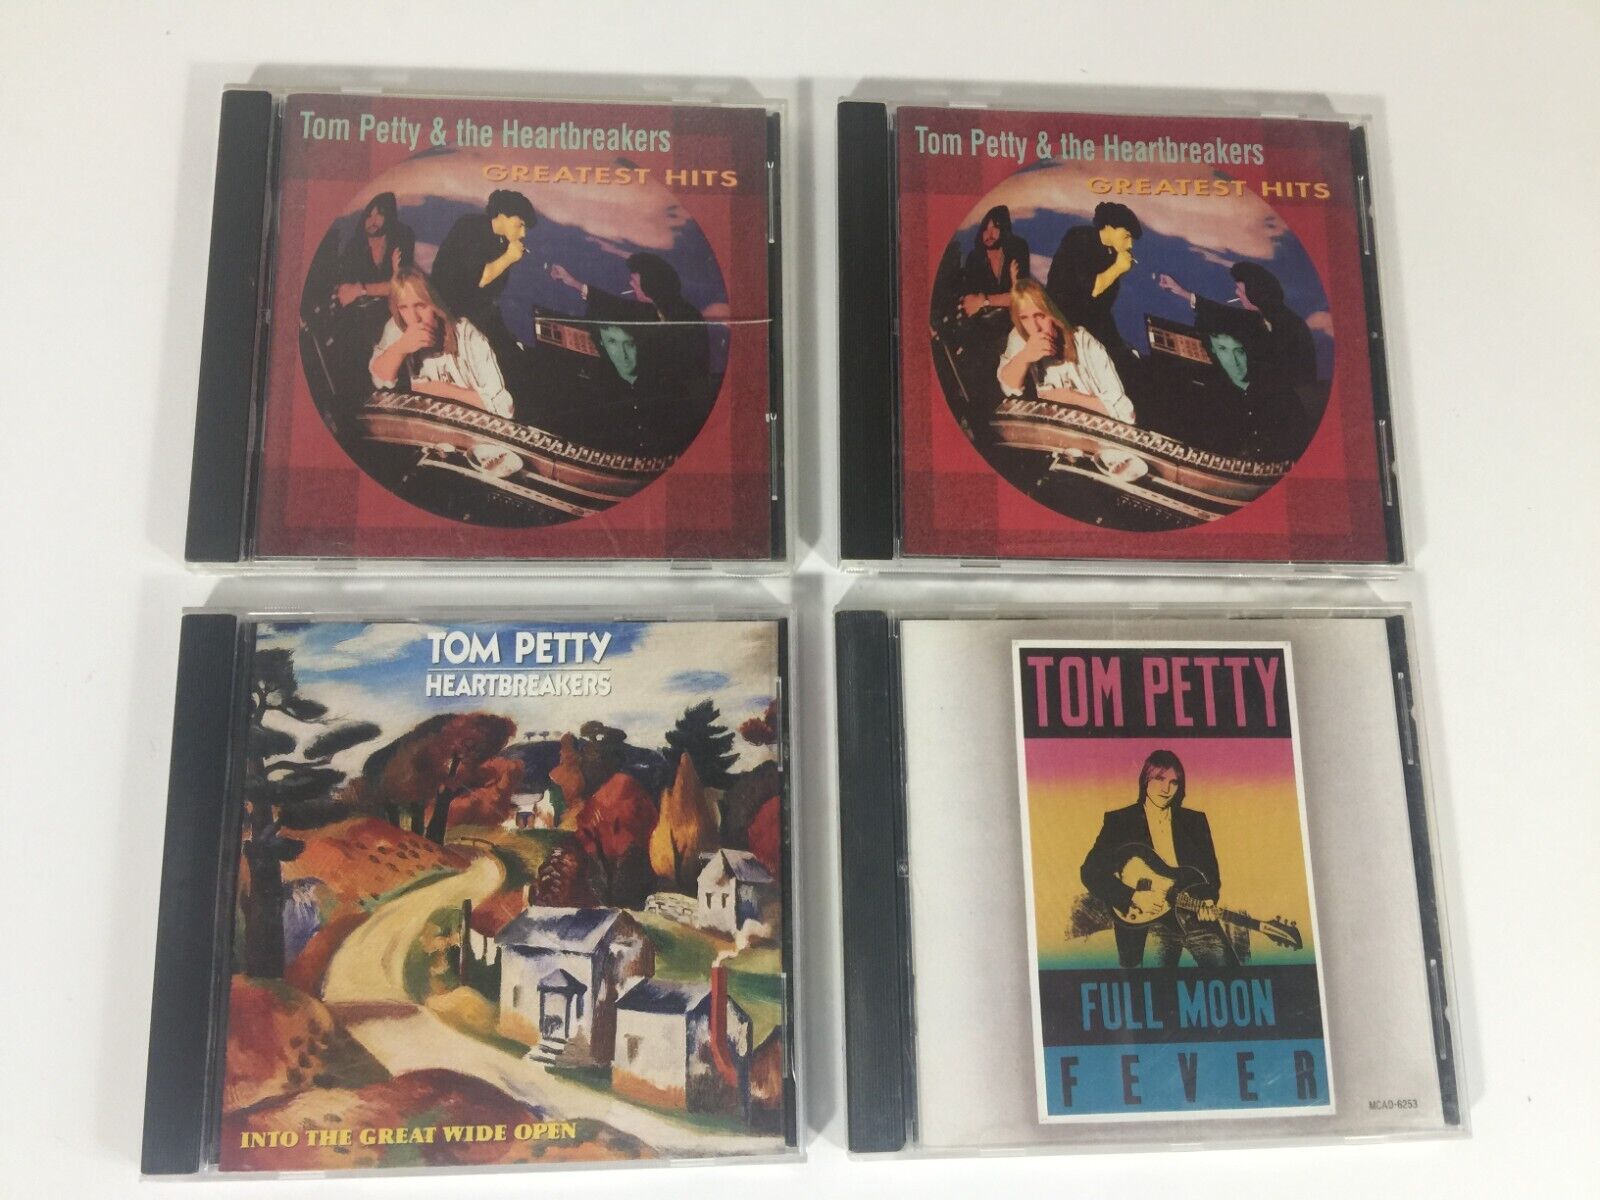 TOM PETTY 4 CD Lot Into The Great Wide Open Greatest Hits x2 Full Moon Fever